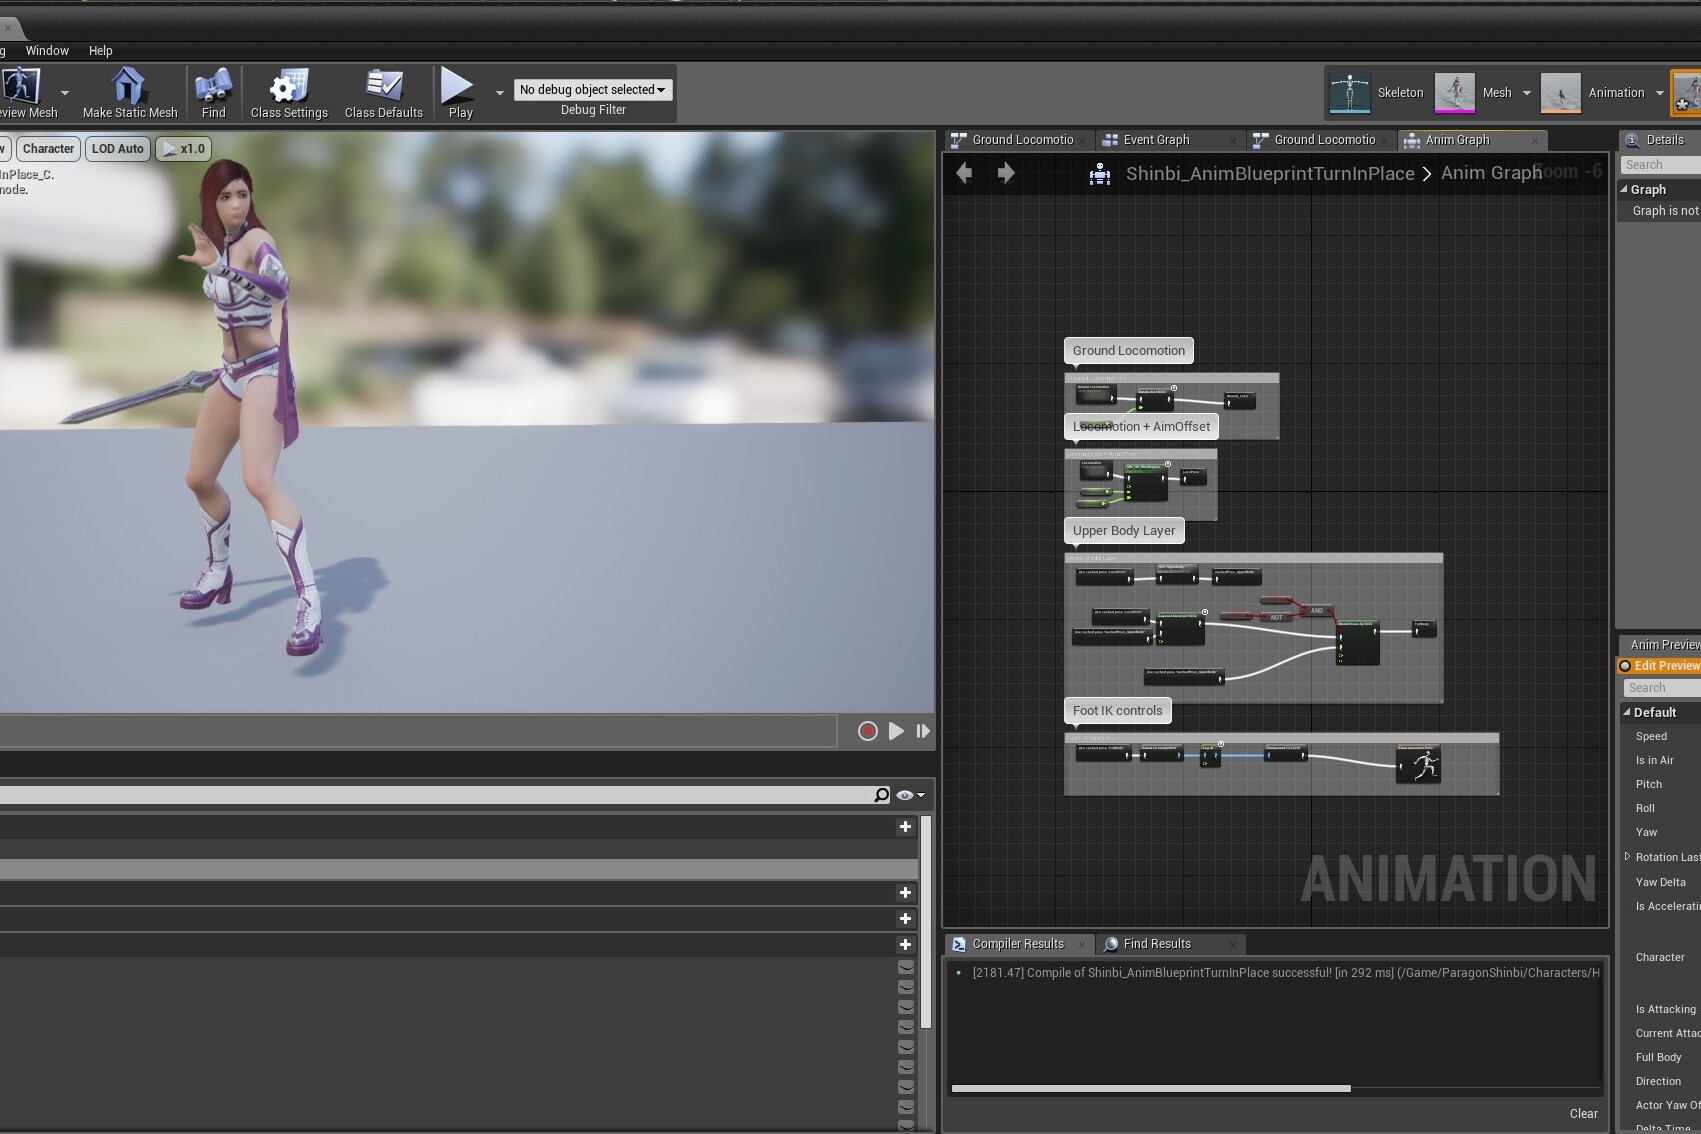 Editing and Animation